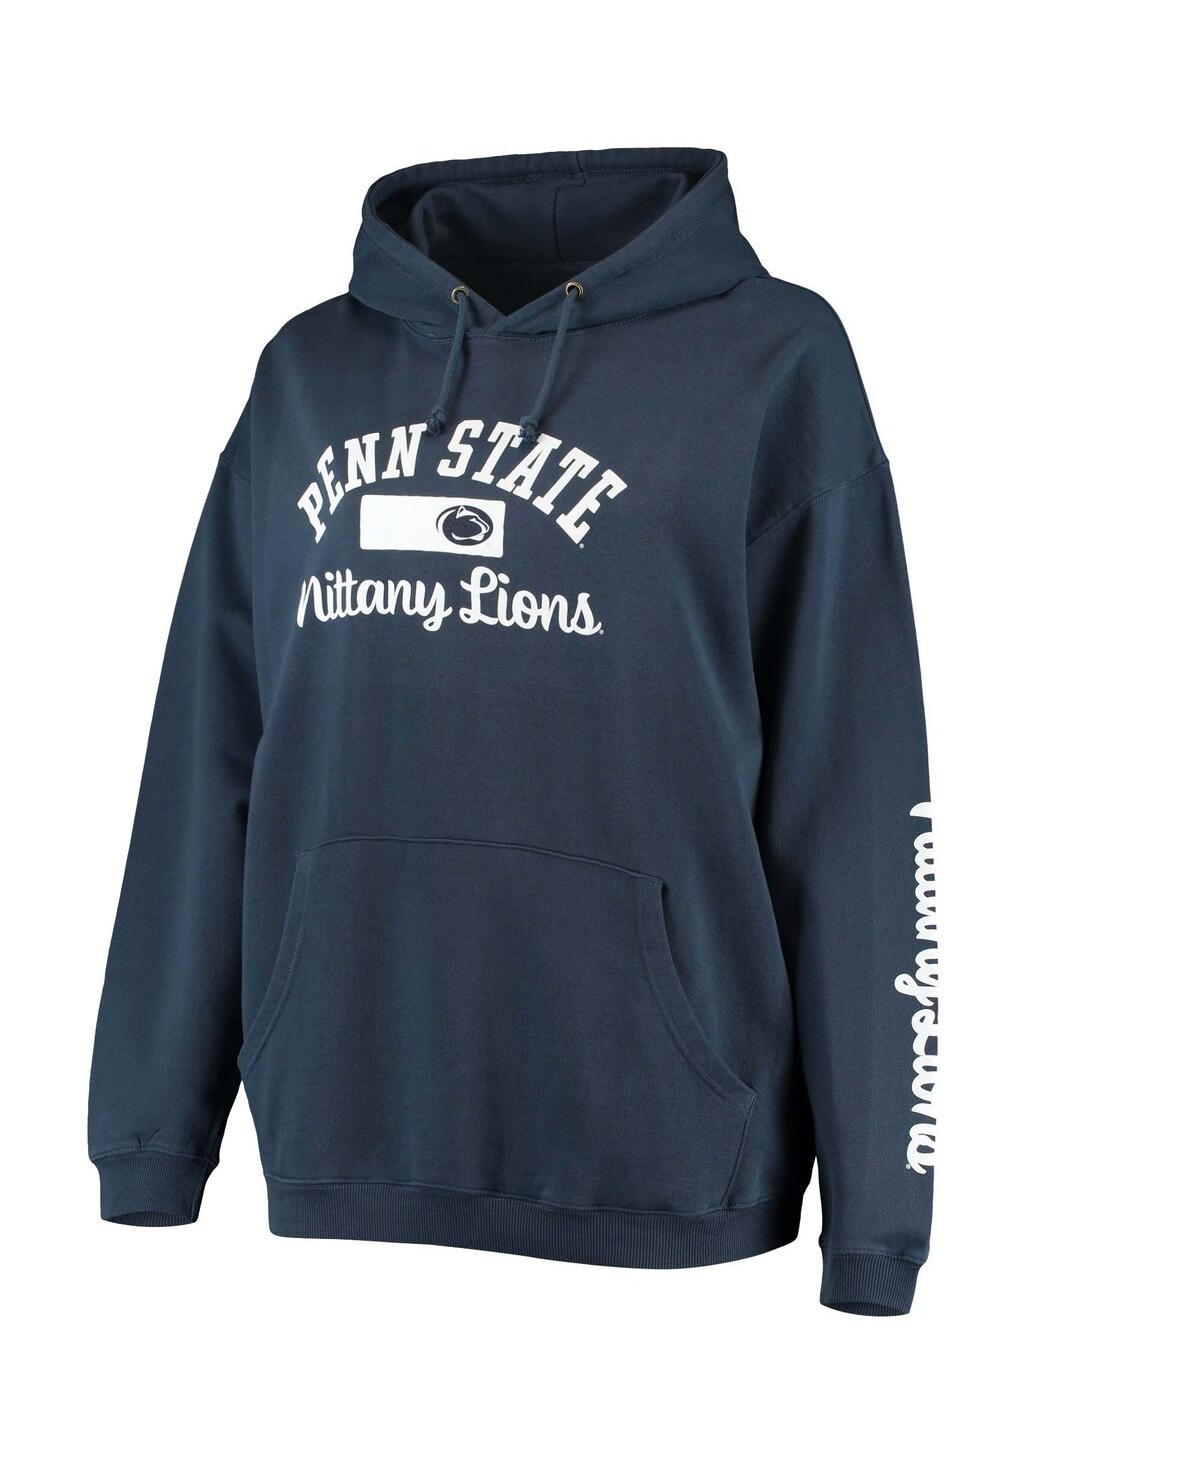 Shop Pressbox Women's  Navy Penn State Nittany Lions Rock N Roll Super Oversized Pullover Hoodie